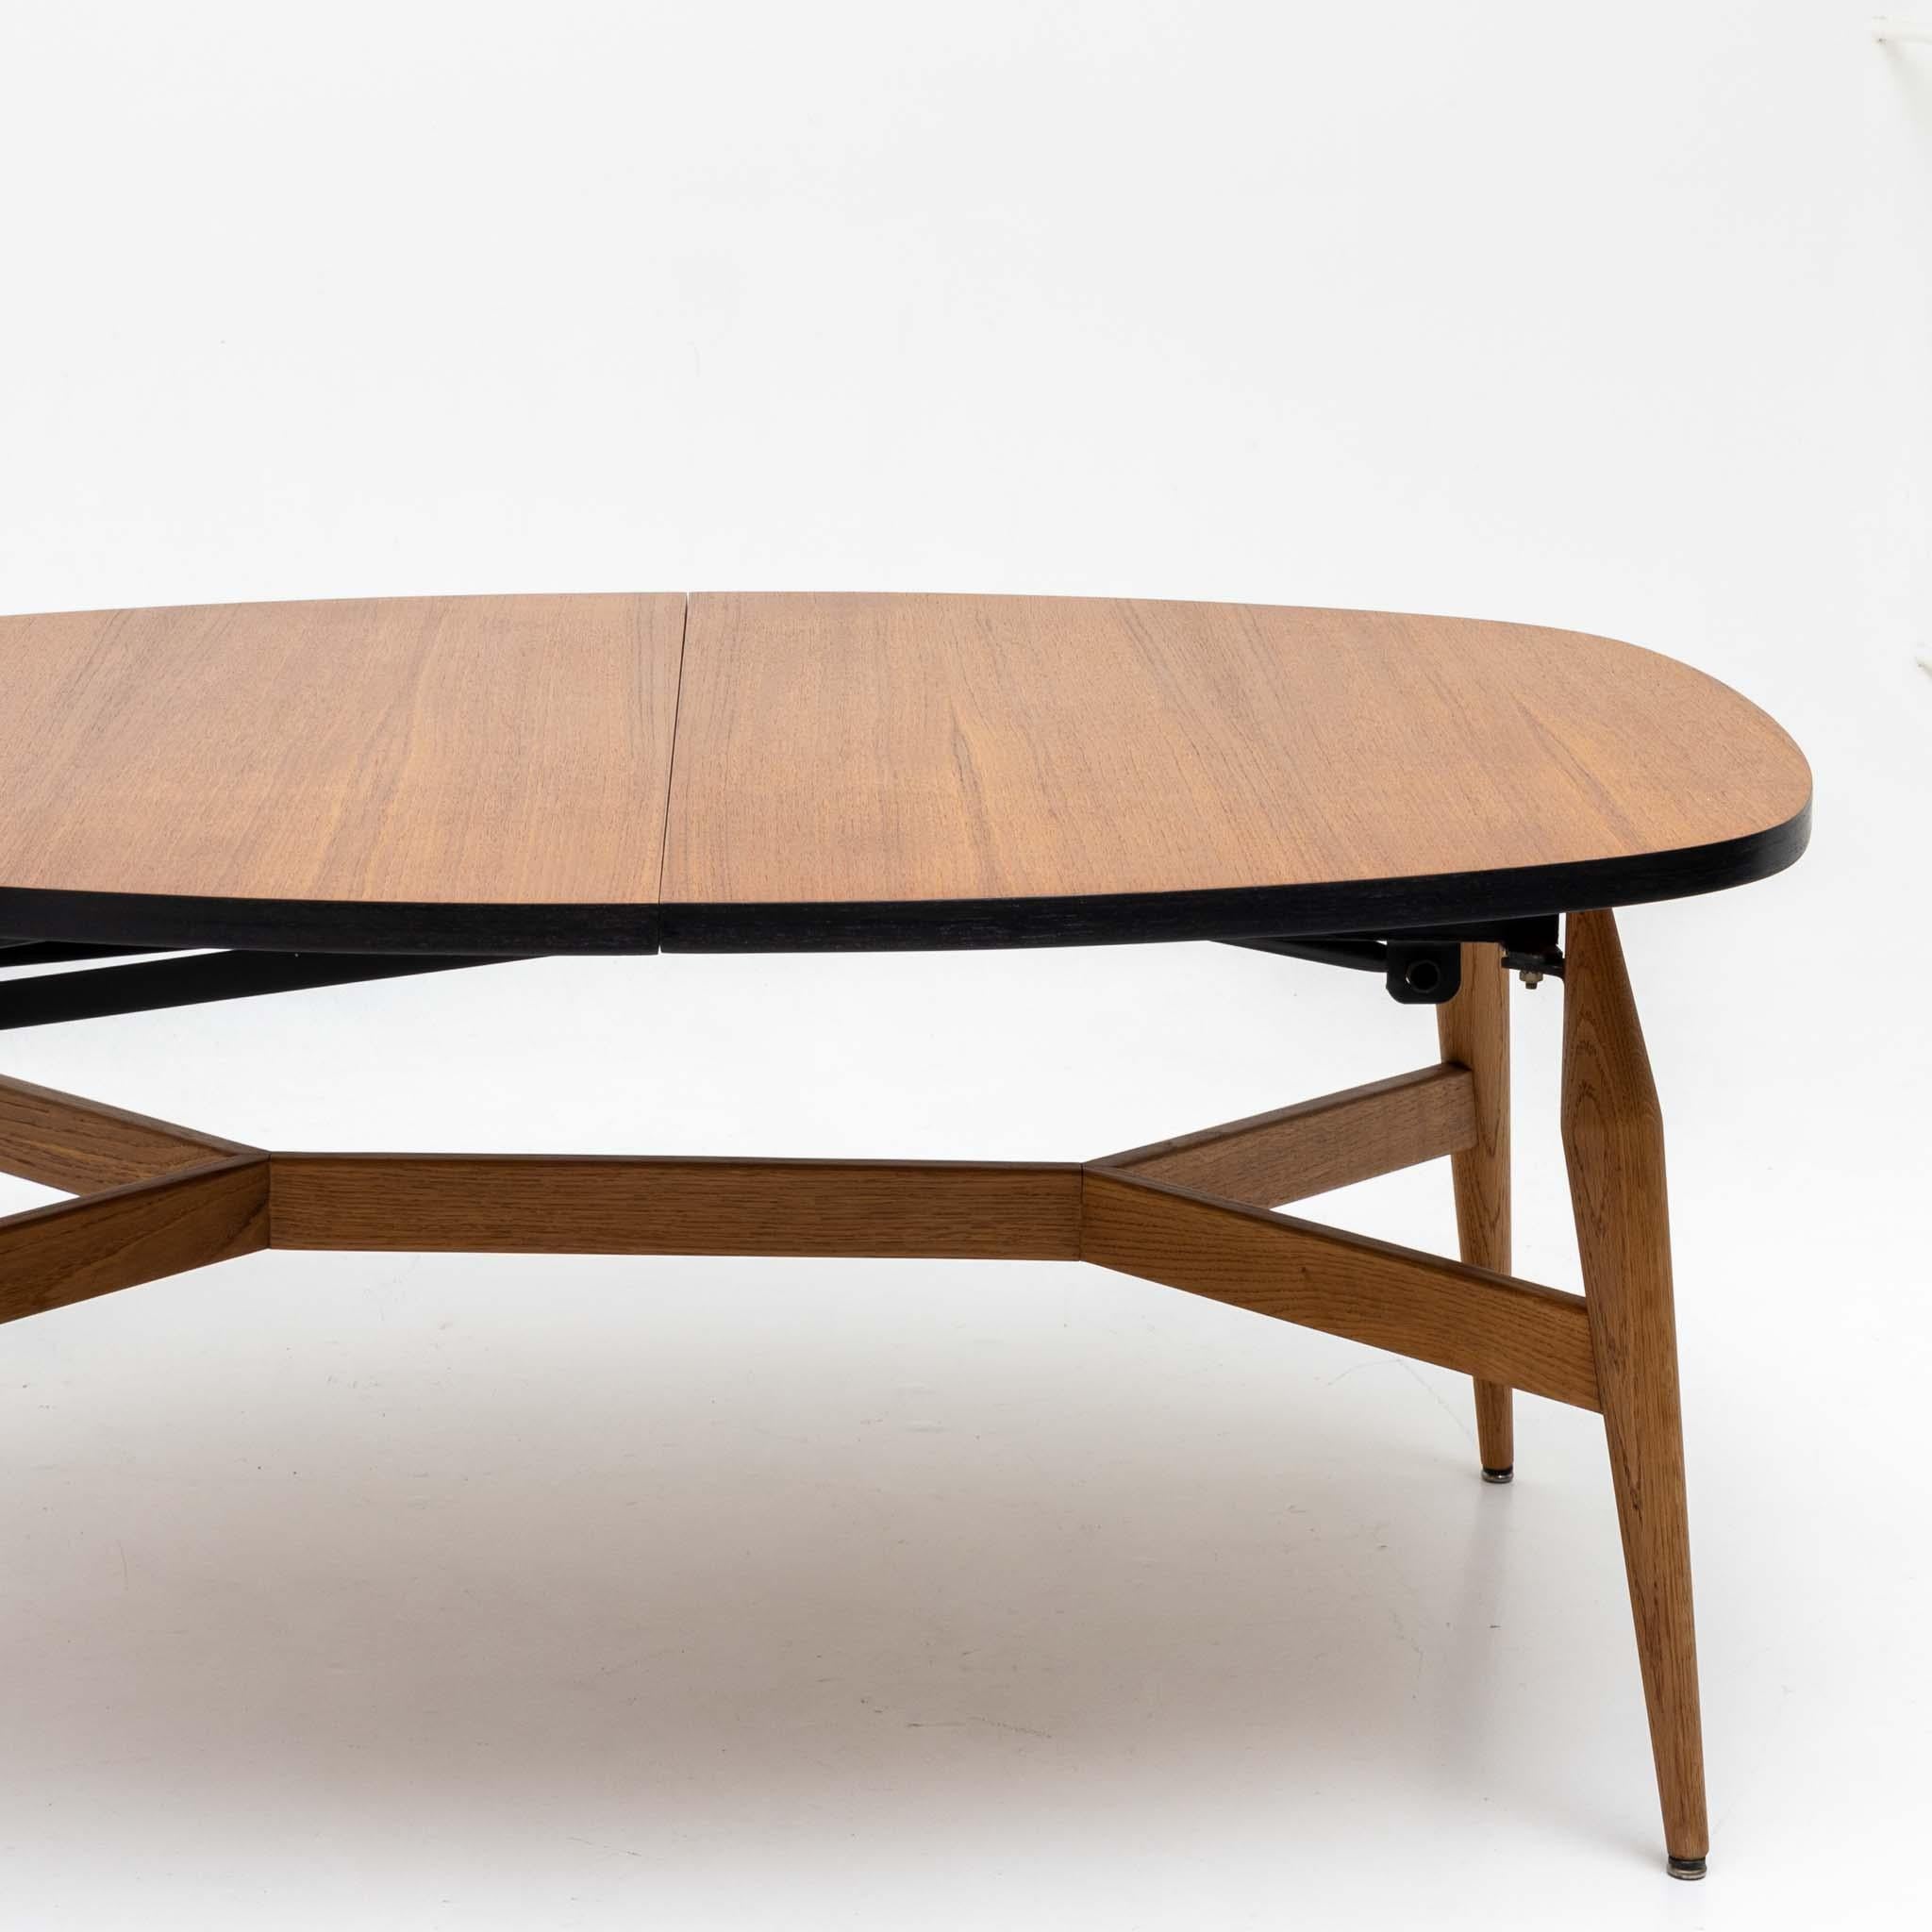 Wood Multifunctional Table, Mid-20th Century For Sale